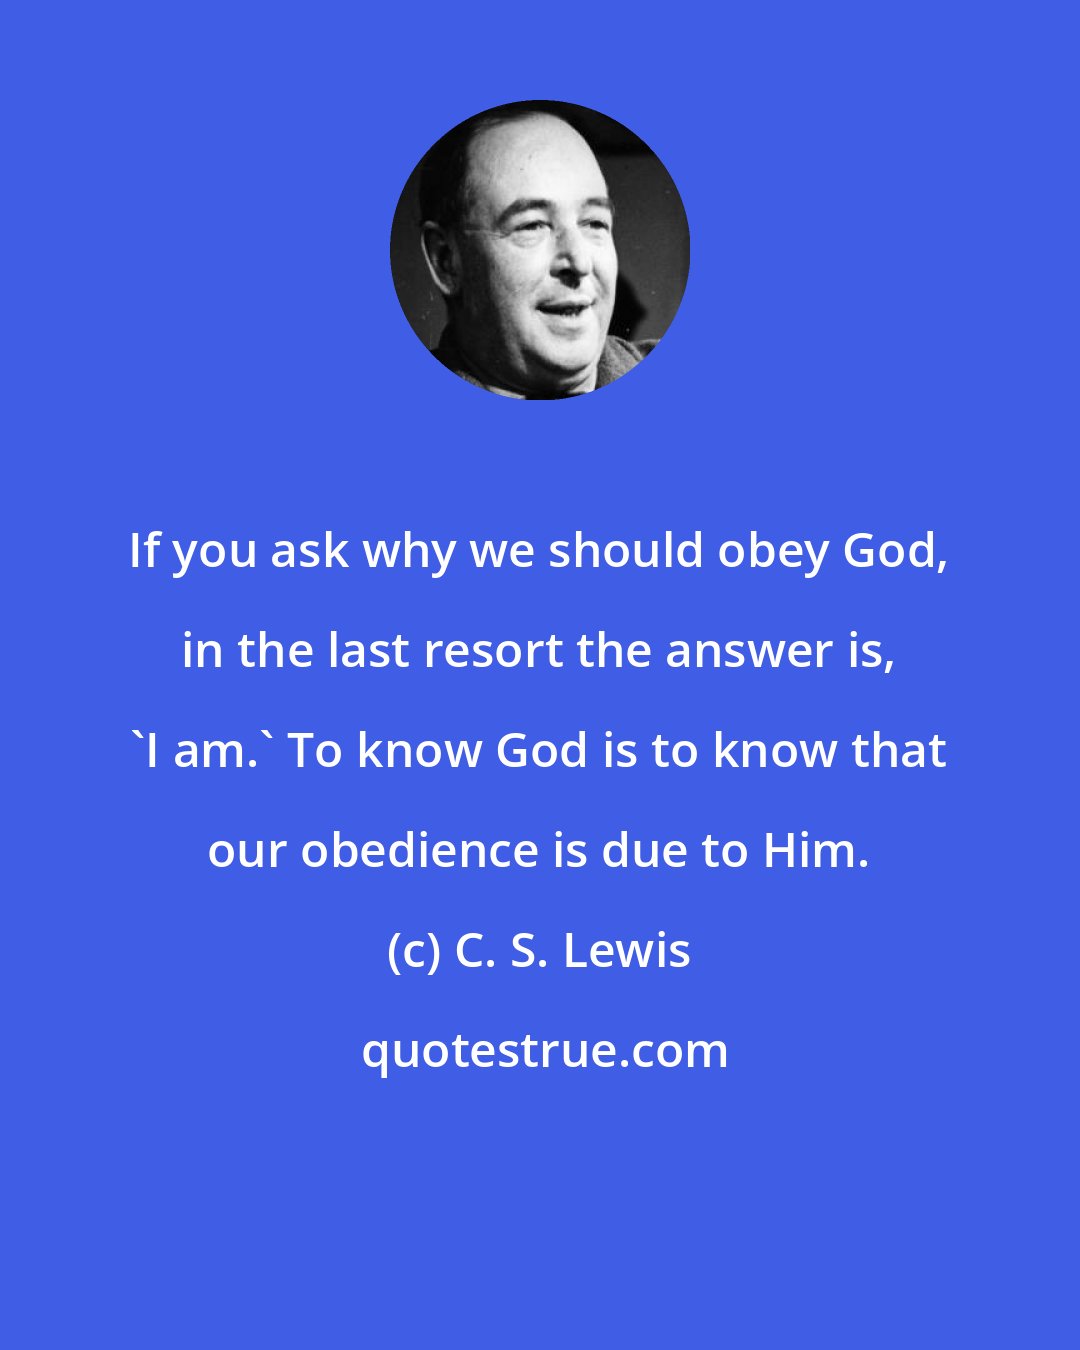 C. S. Lewis: If you ask why we should obey God, in the last resort the answer is, 'I am.' To know God is to know that our obedience is due to Him.